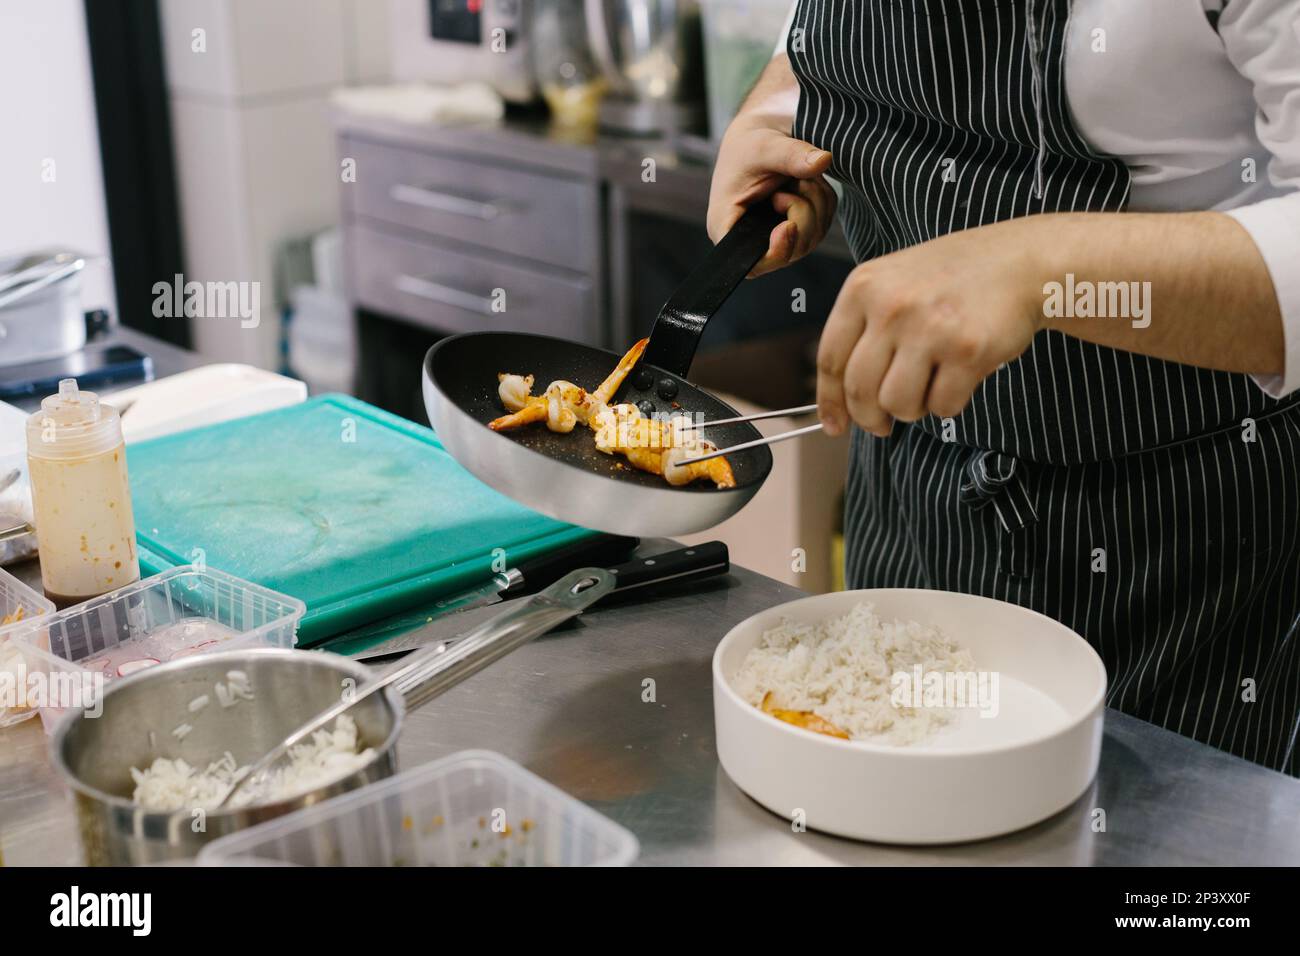 Preparing a bowl of seafood, a male chef prepares a delicious dish in a restaurant kitchen. Stock Photo